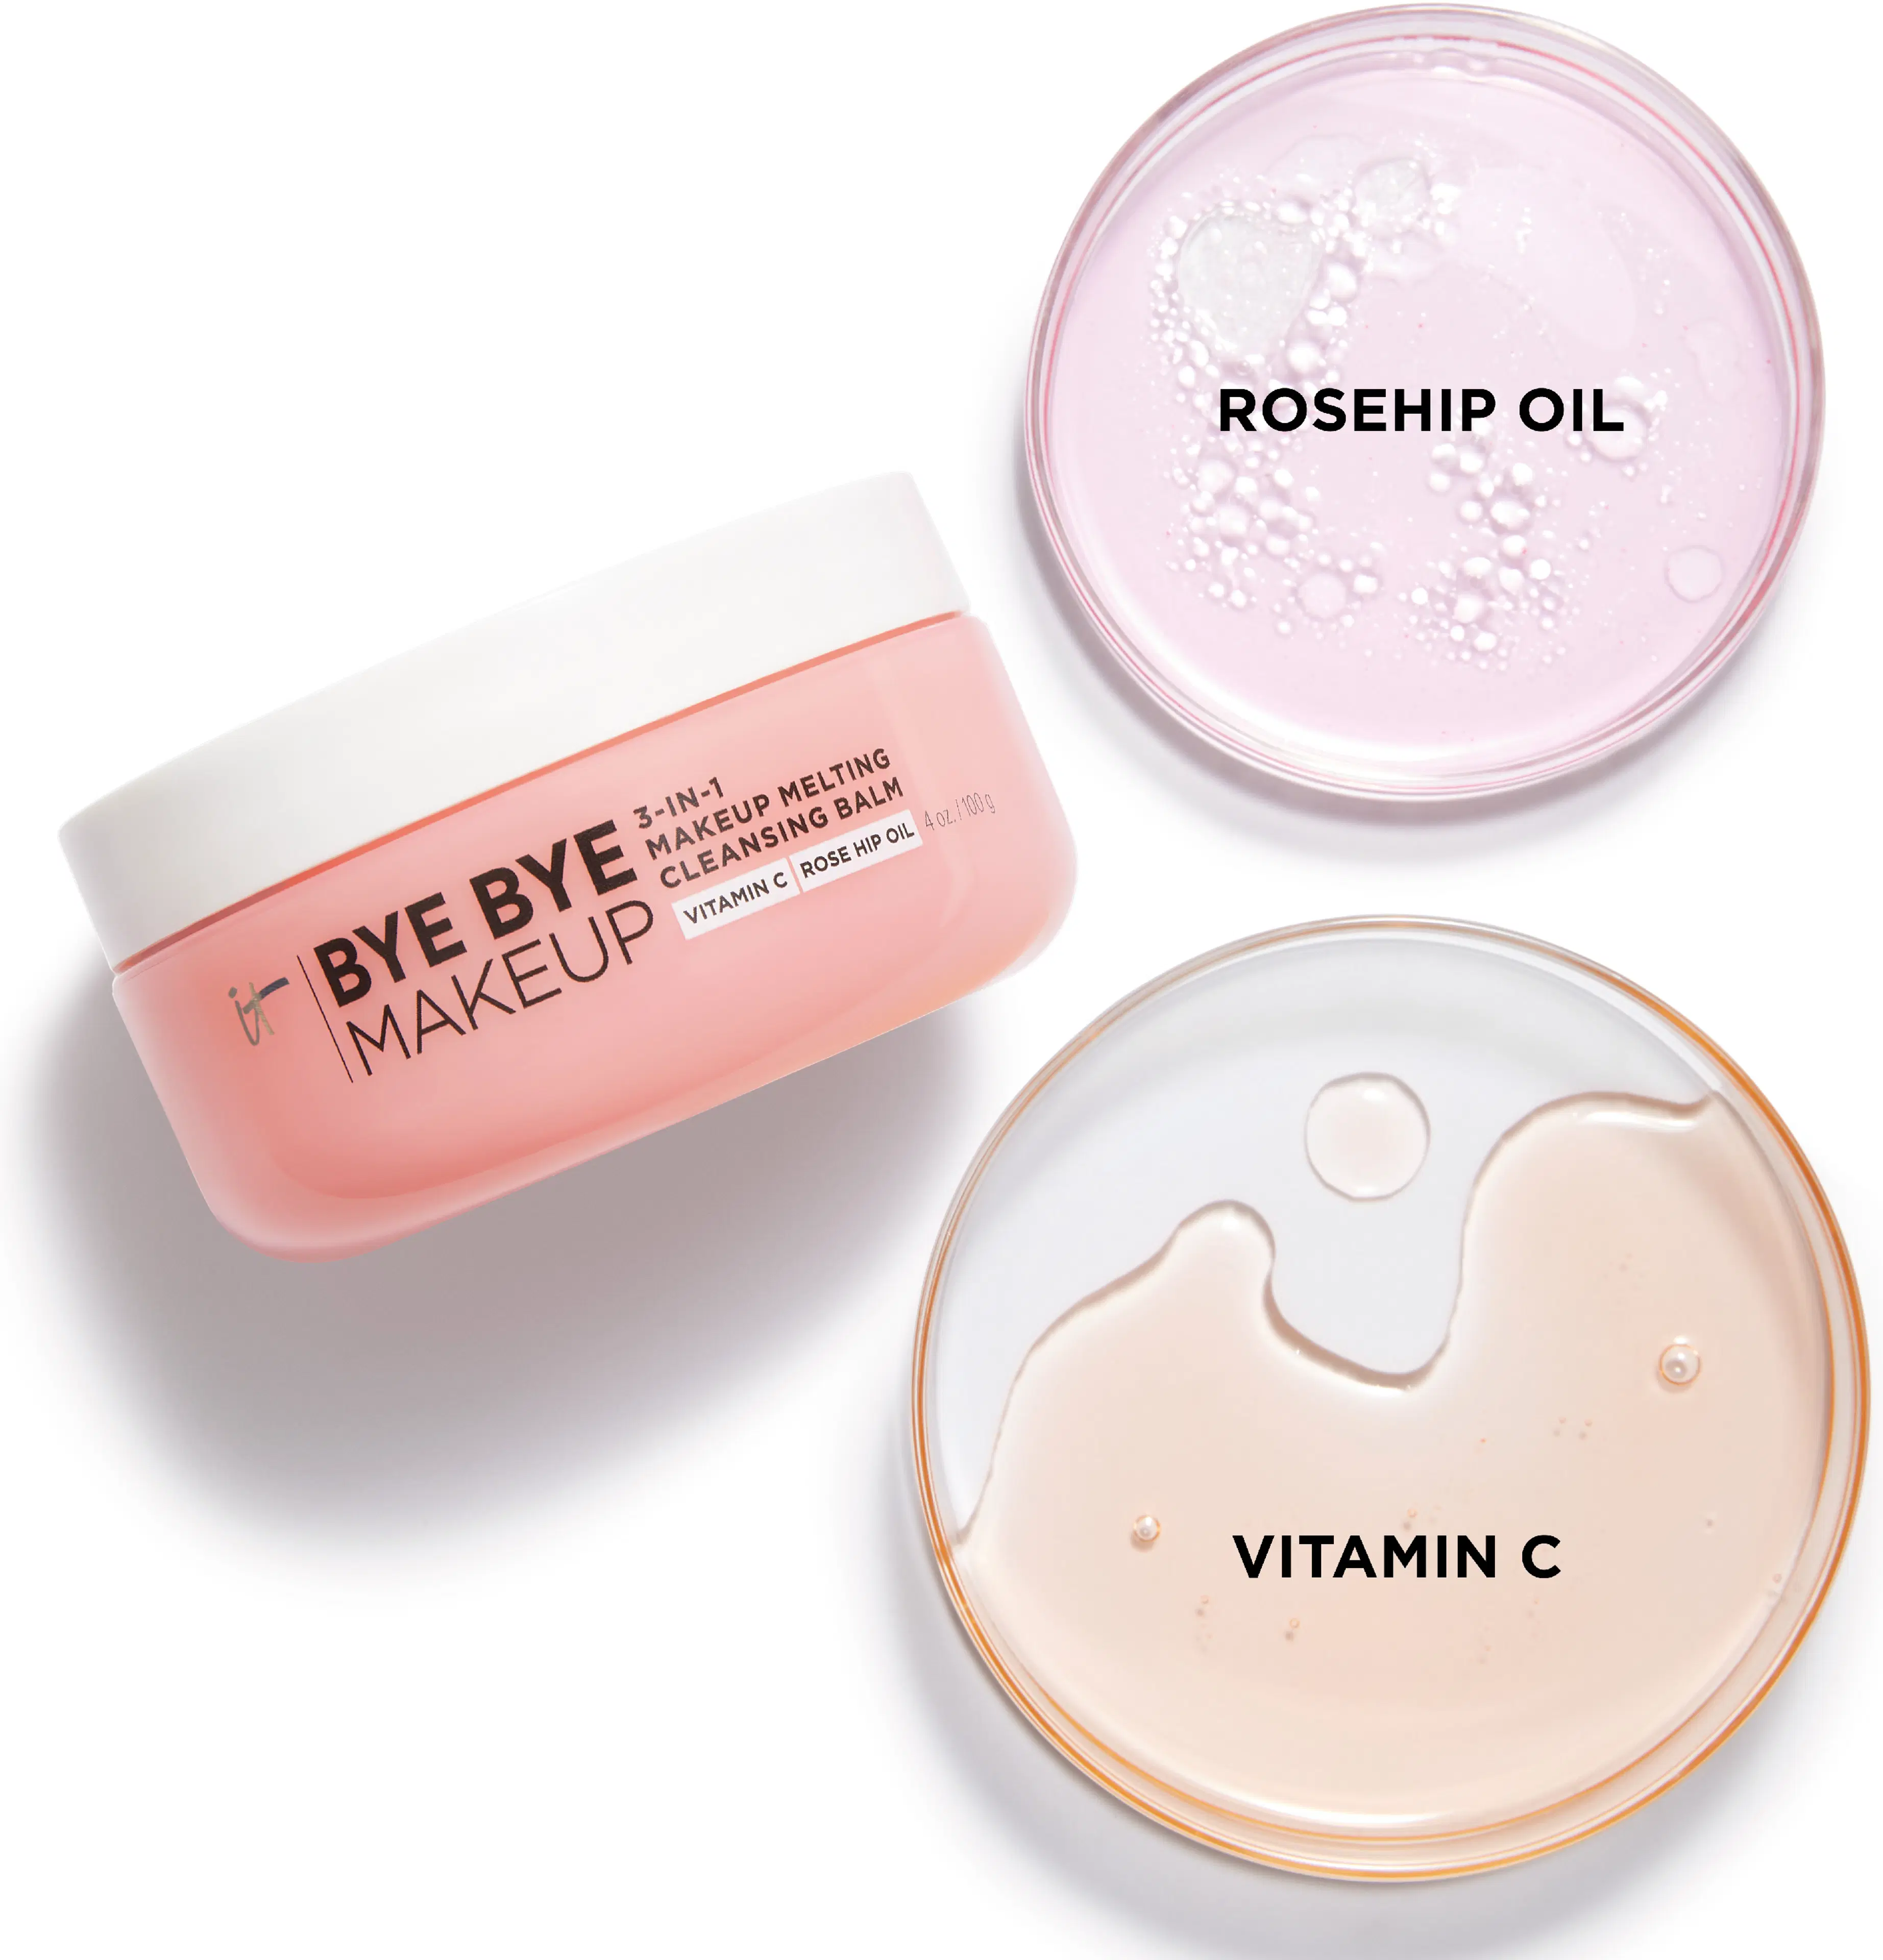 IT Cosmetics Bye Bye Makeup 3-in-1 Makeup Melting Cleansing Balm meikinpoistoaine 100 g